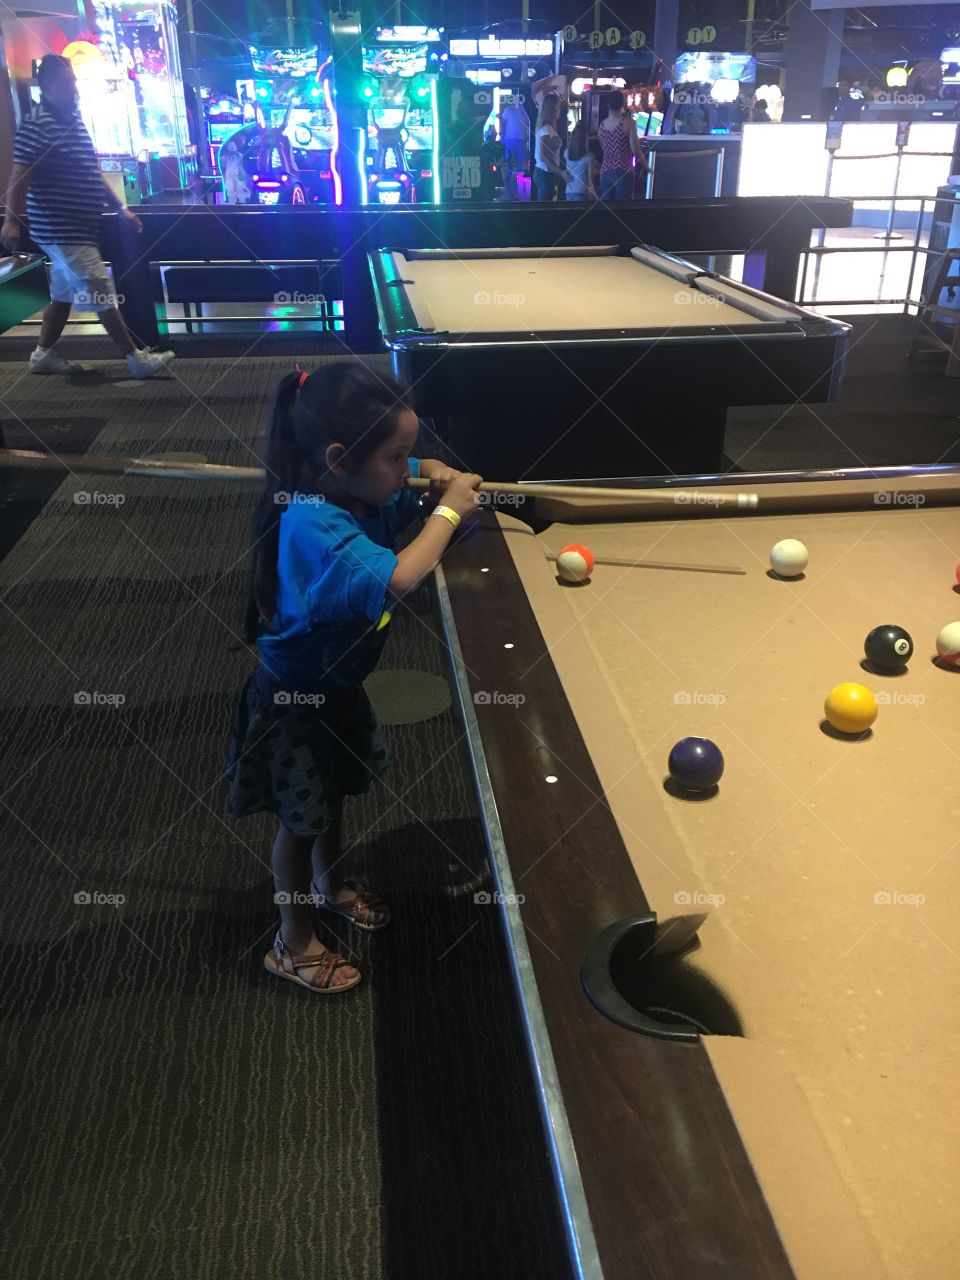 Attempting to play pool!